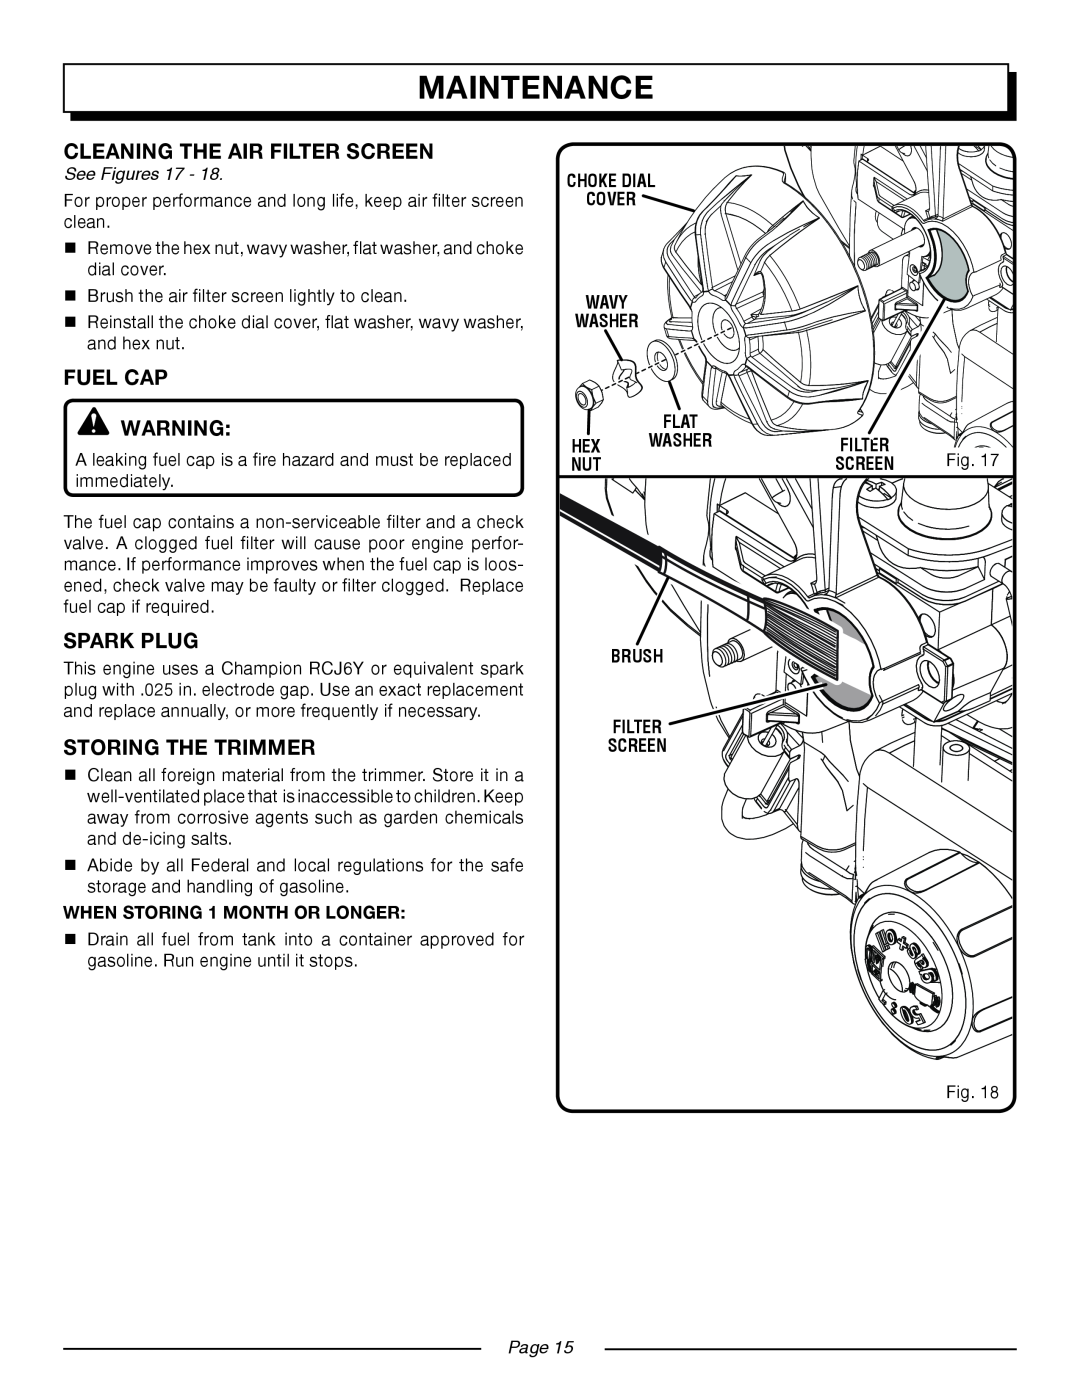 Homelite UT21907 Cleaning The Air Filter Screen, Fuel Cap, Spark Plug, STORing the trimmer, Maintenance, See Figures, Page 